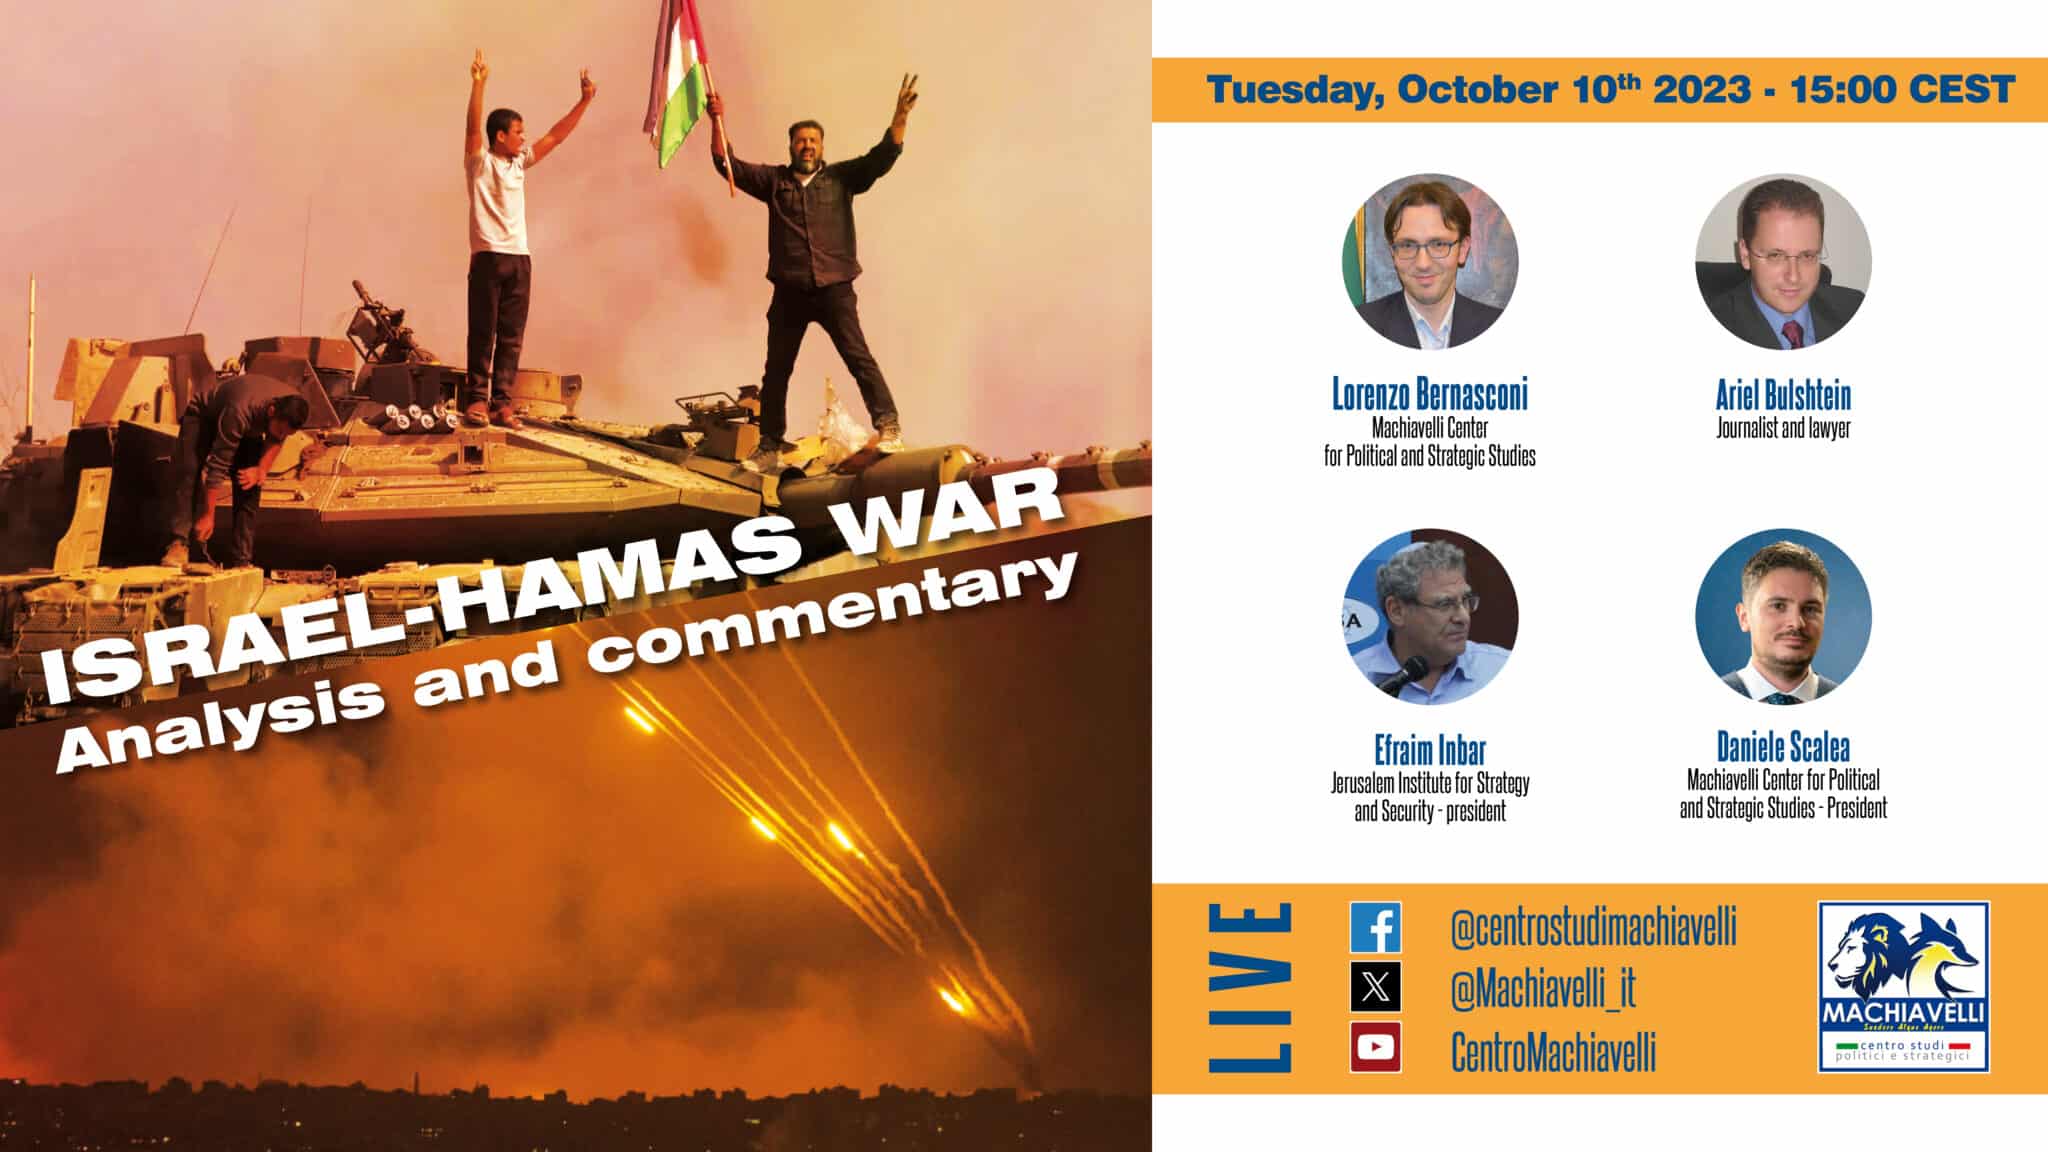 israel hamas war, online conference, by the machiavelli center for political and strategic studies